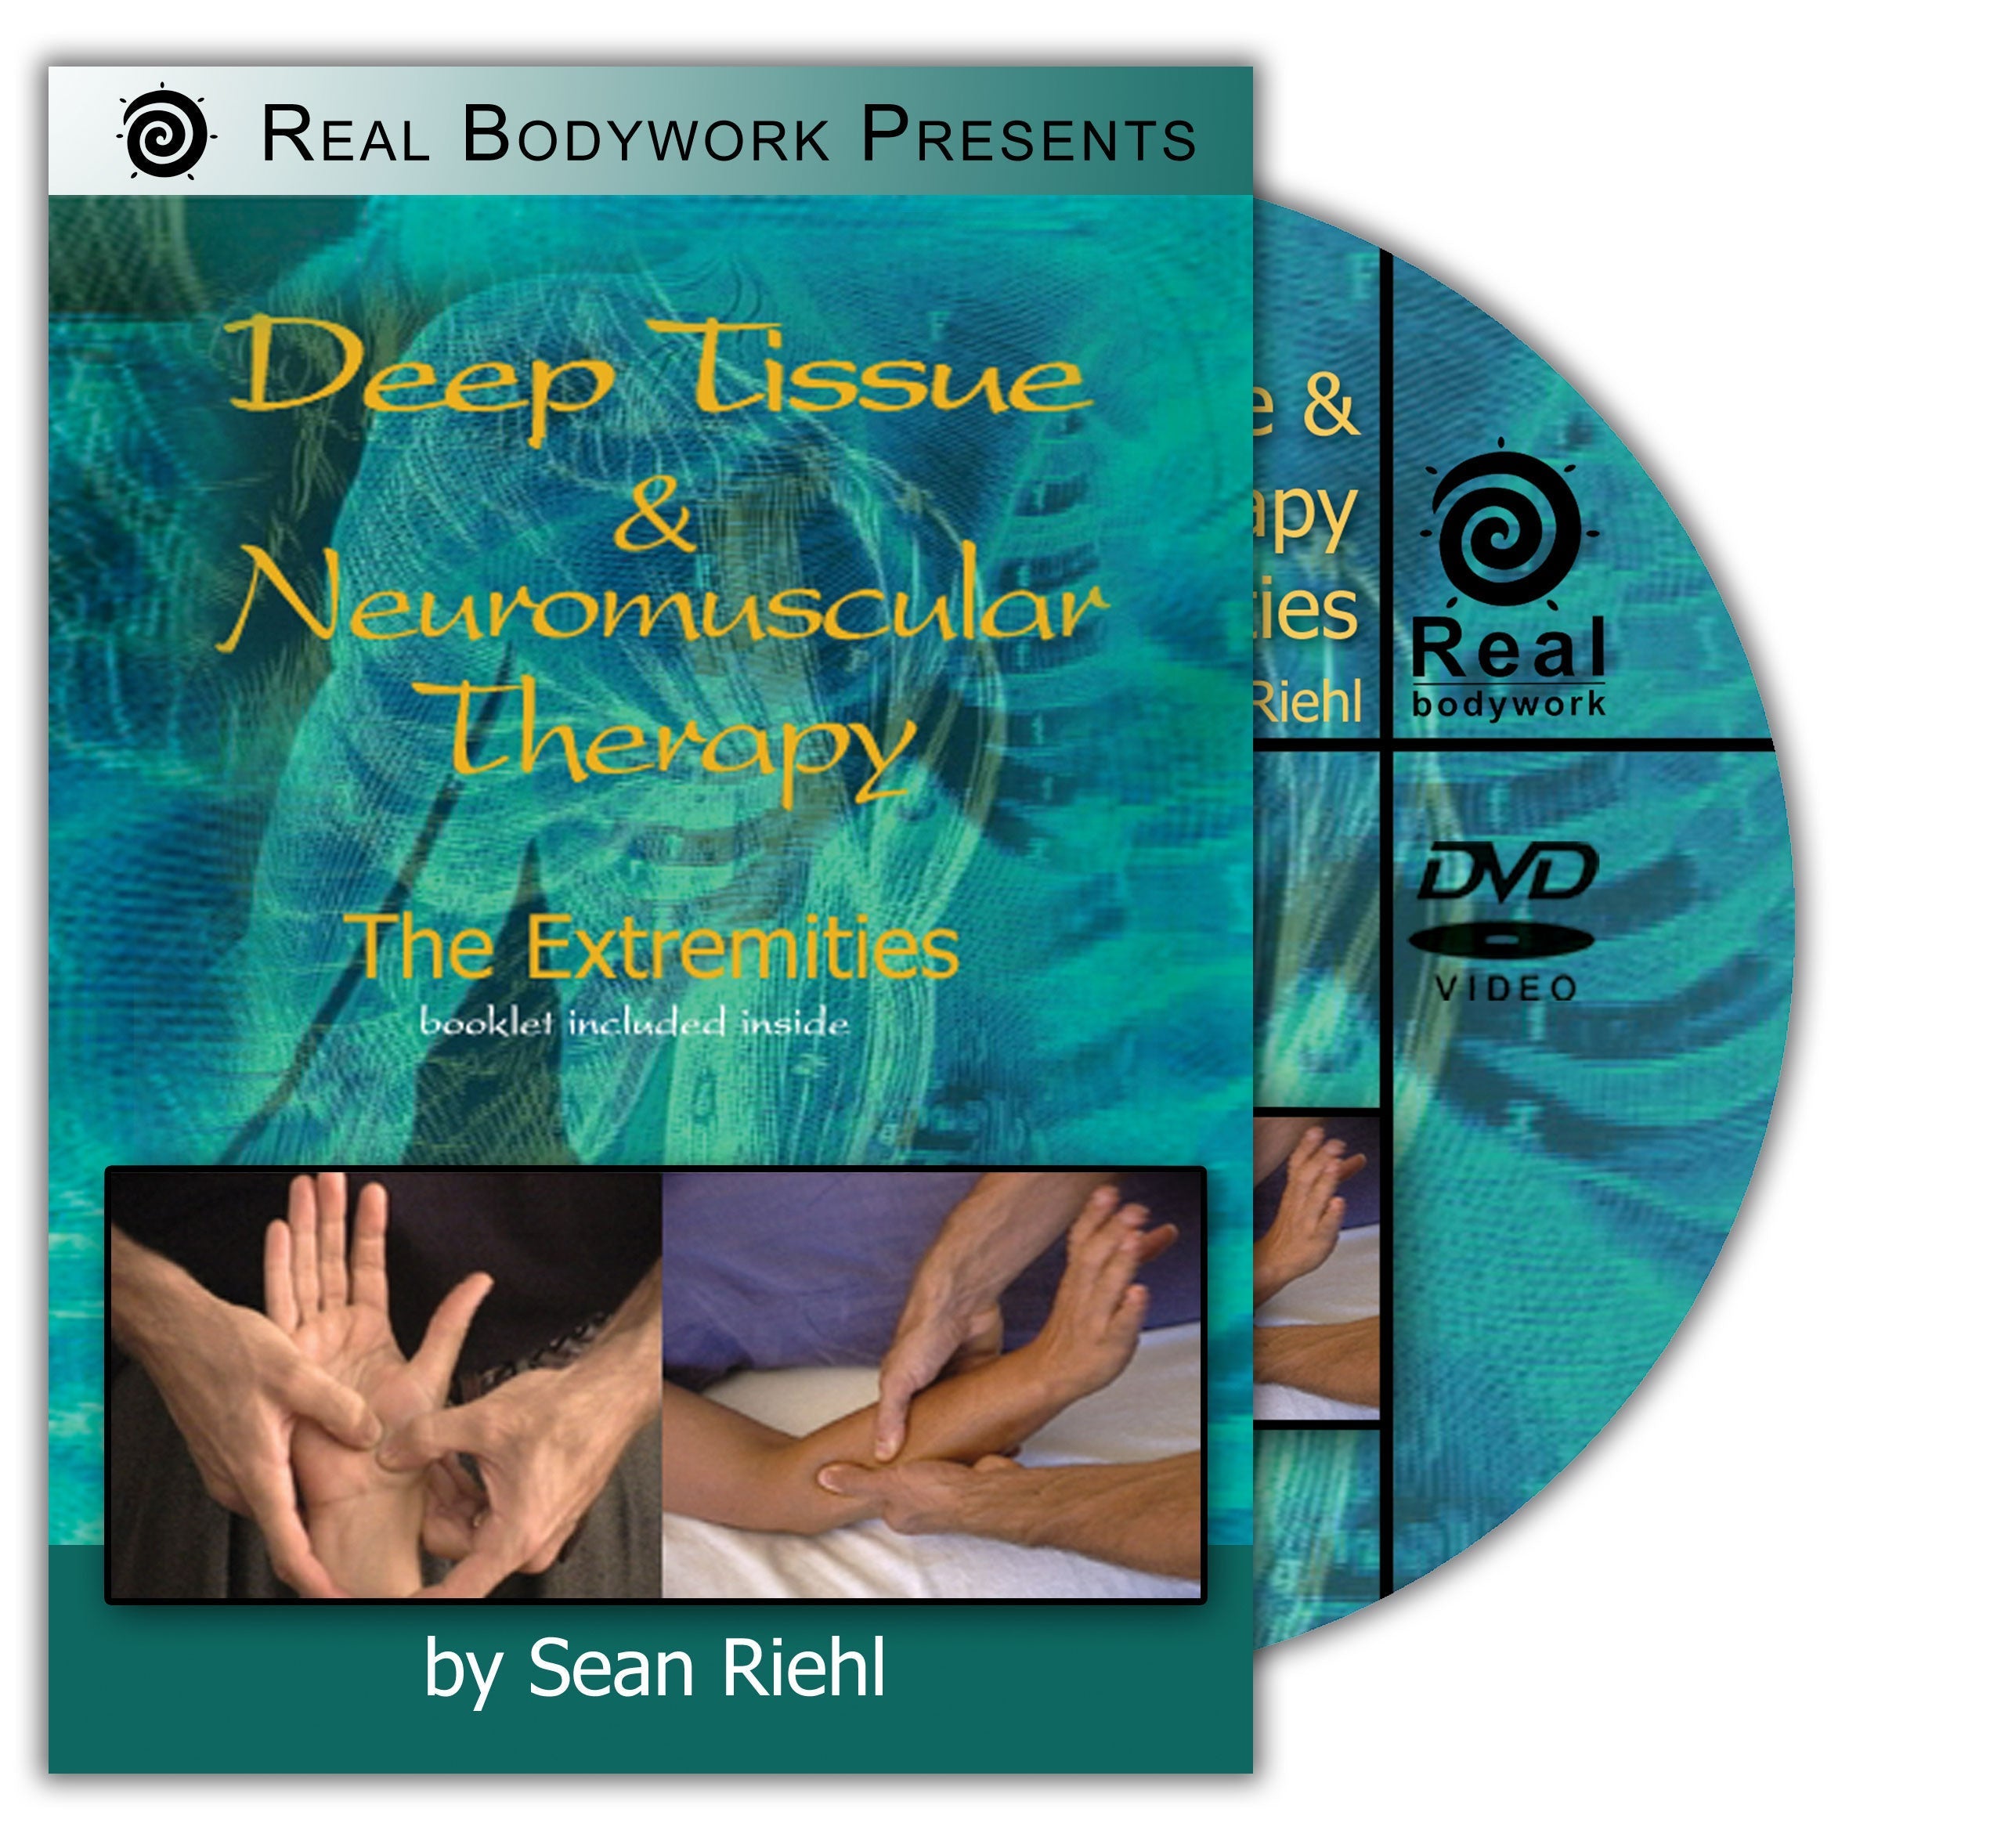 Deep Tissue Massage & NMT The Extremities Video on DVD & Streaming Version - Real Bodywork